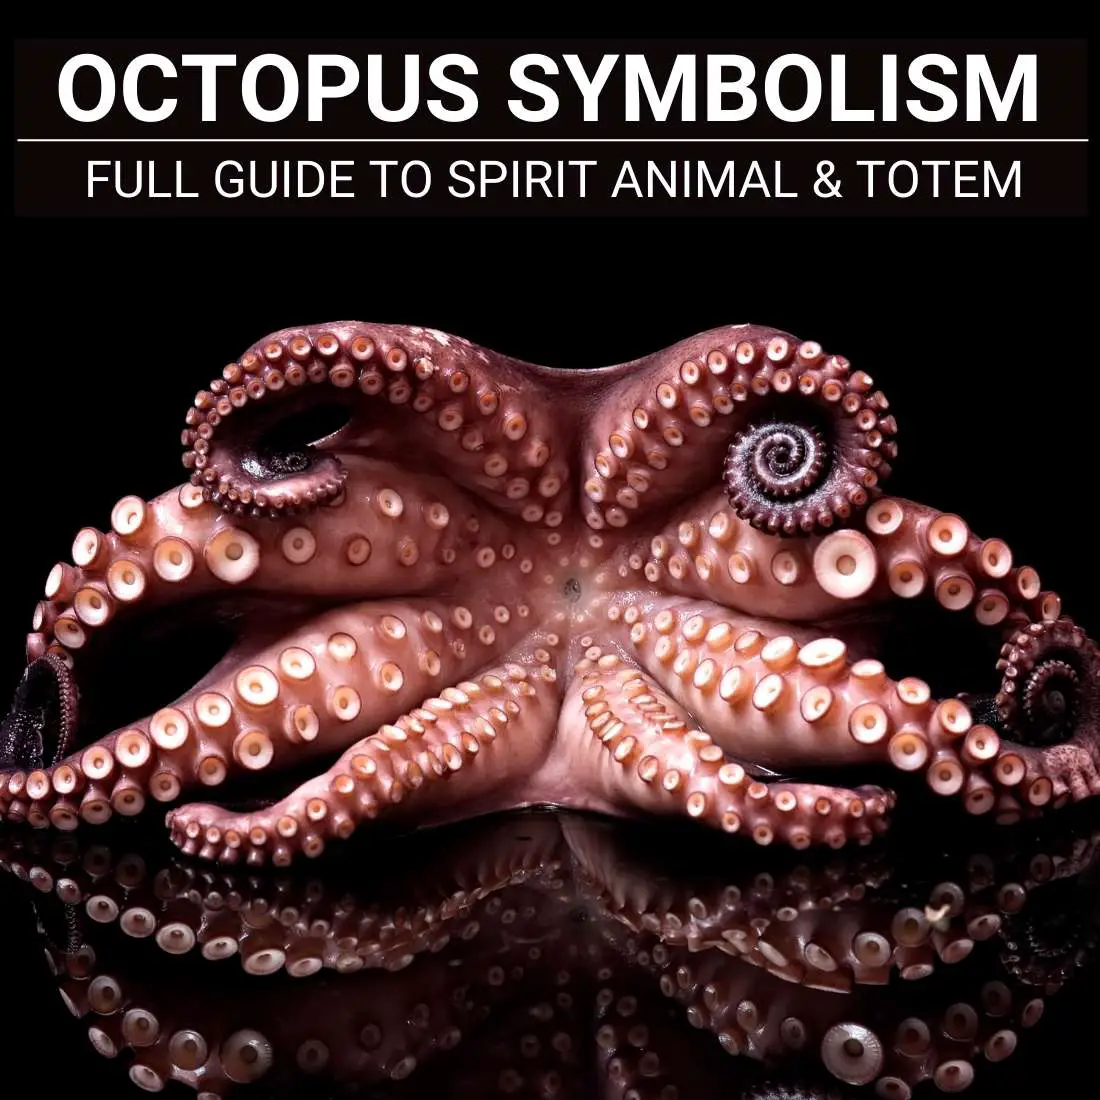 What Does The Octopus Symbolize Spiritually?